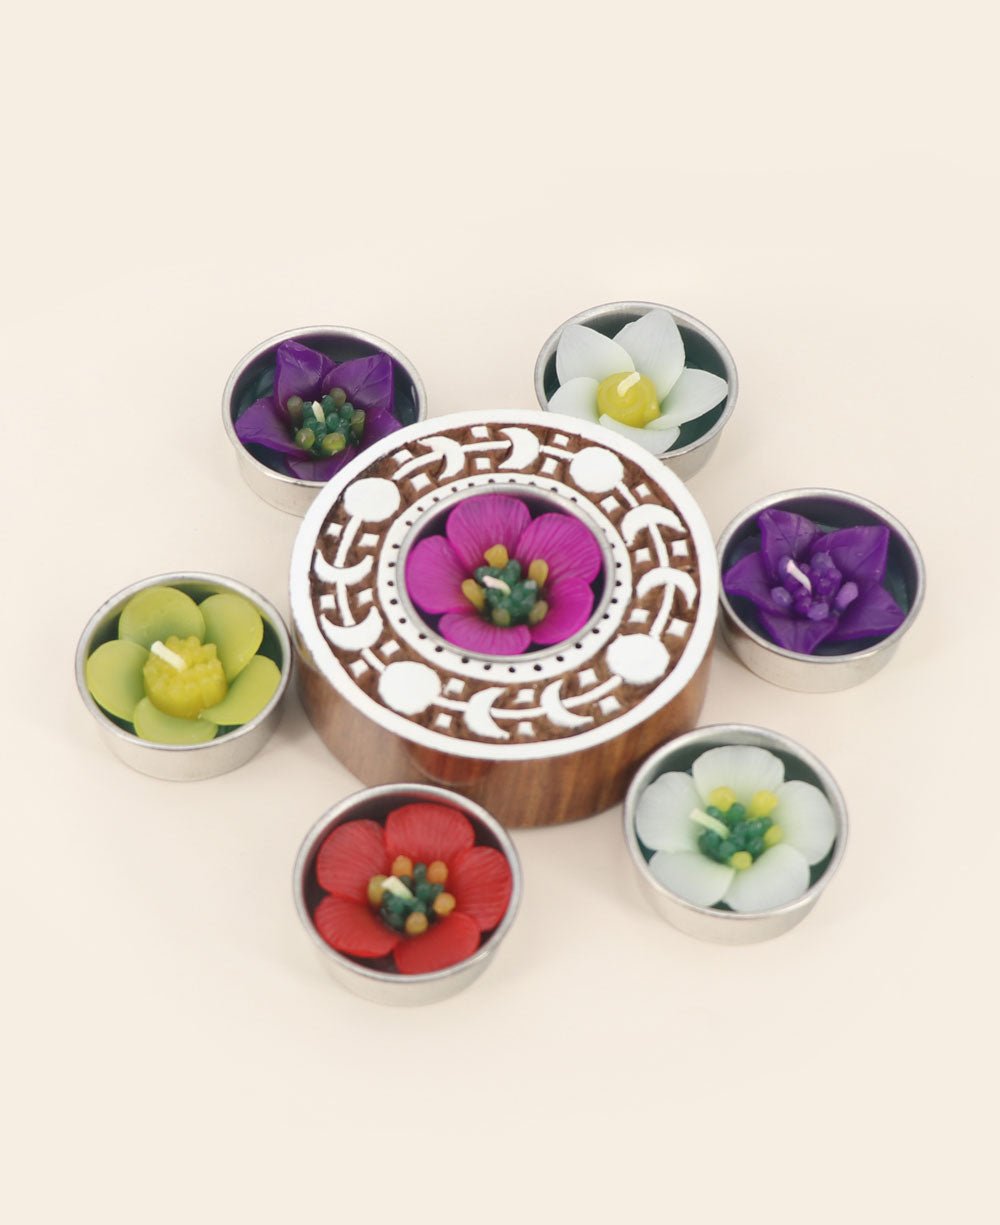 Indian Rosewood Moon Phase Tea-light Holder with Floral Tea-lights - Candle Holders